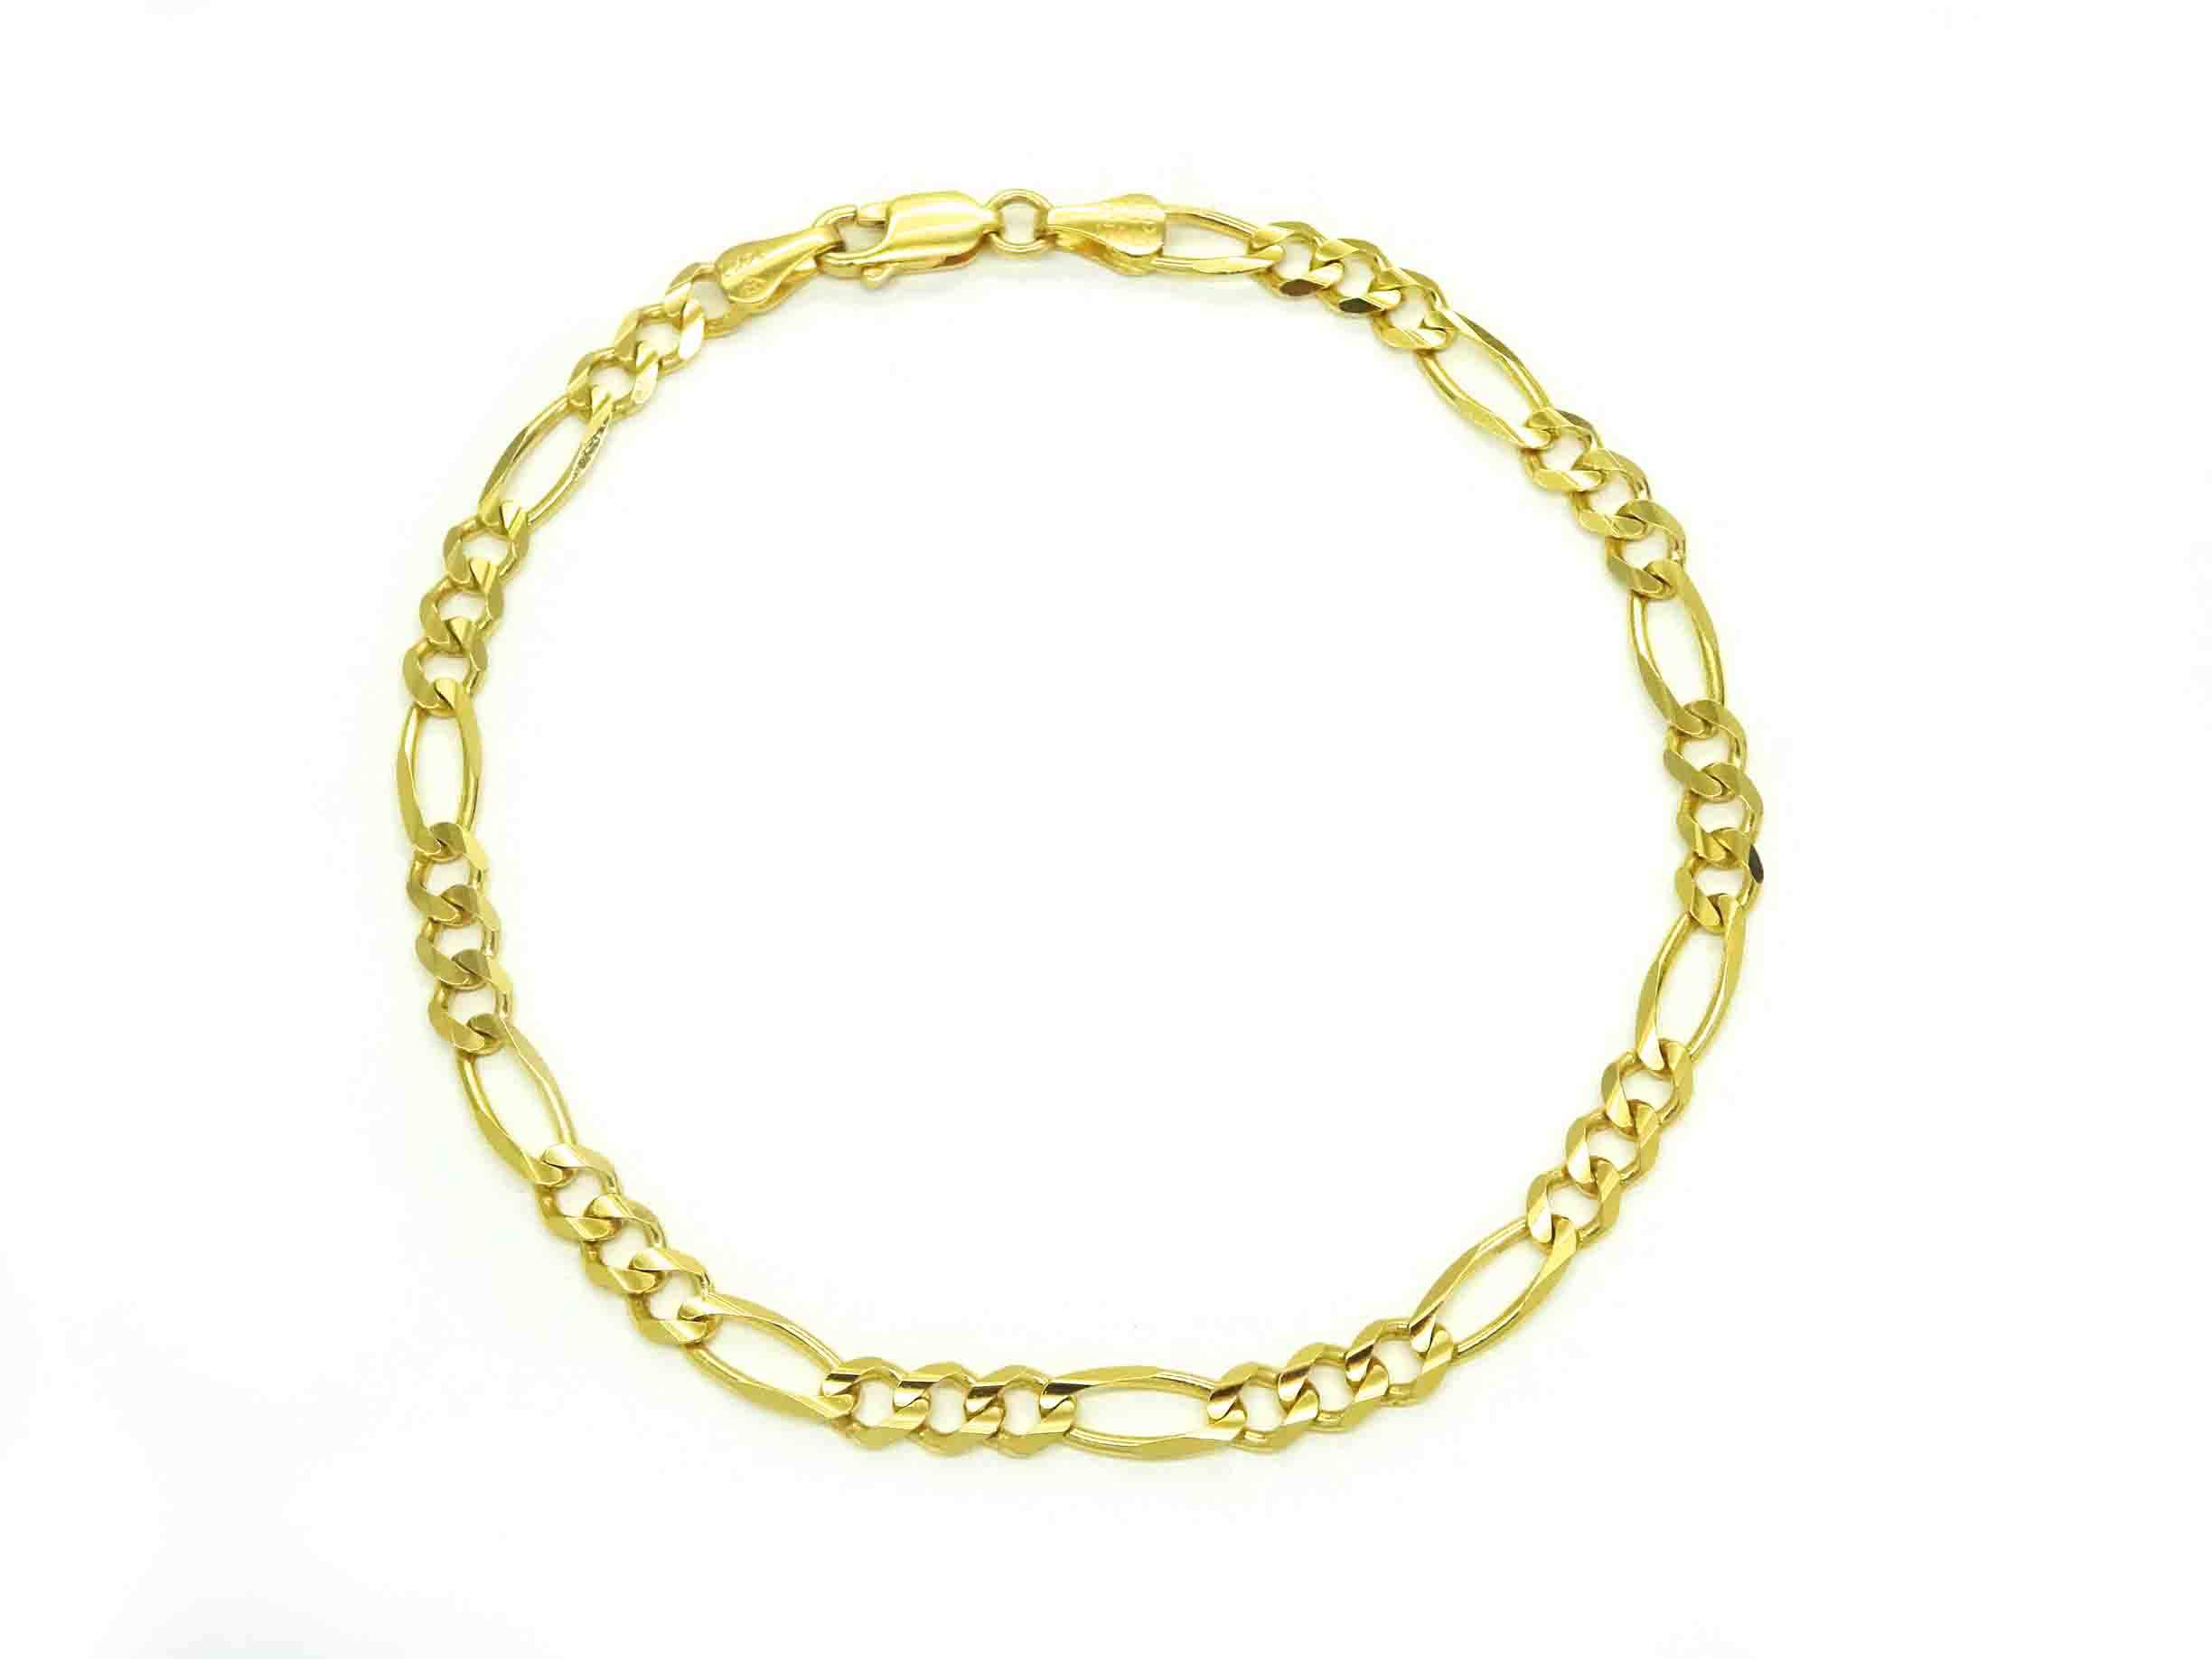 Amazon.com: Nuragold 14k Yellow Gold Solid 8.5mm Figaro Chain Link Diamond  Cut Pave Two Tone Bracelet, Mens Jewelry 8